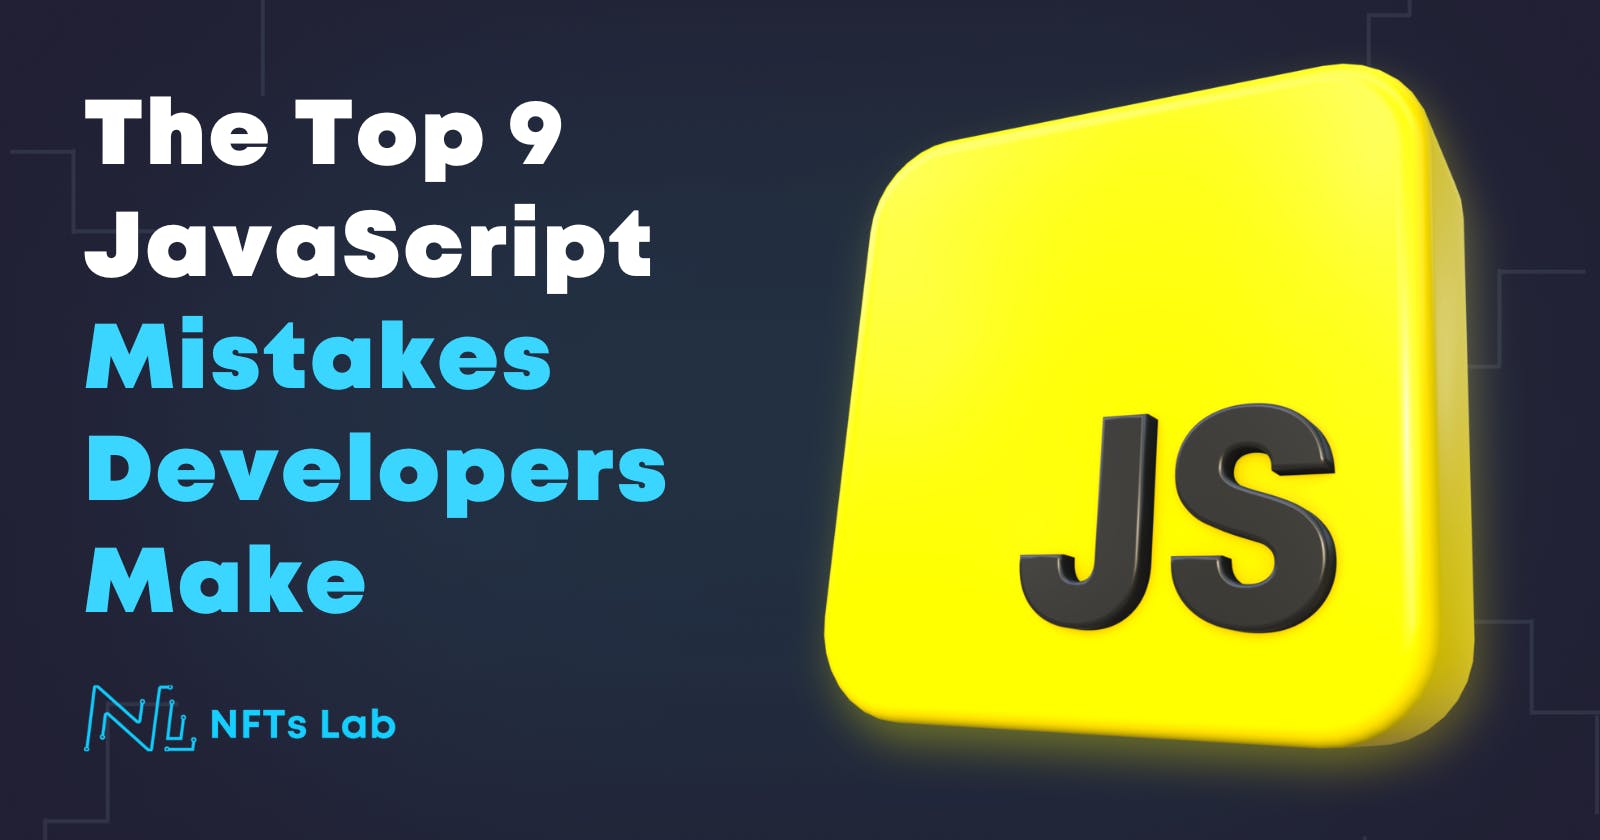 The Top 9 JavaScript Mistakes Developers Make